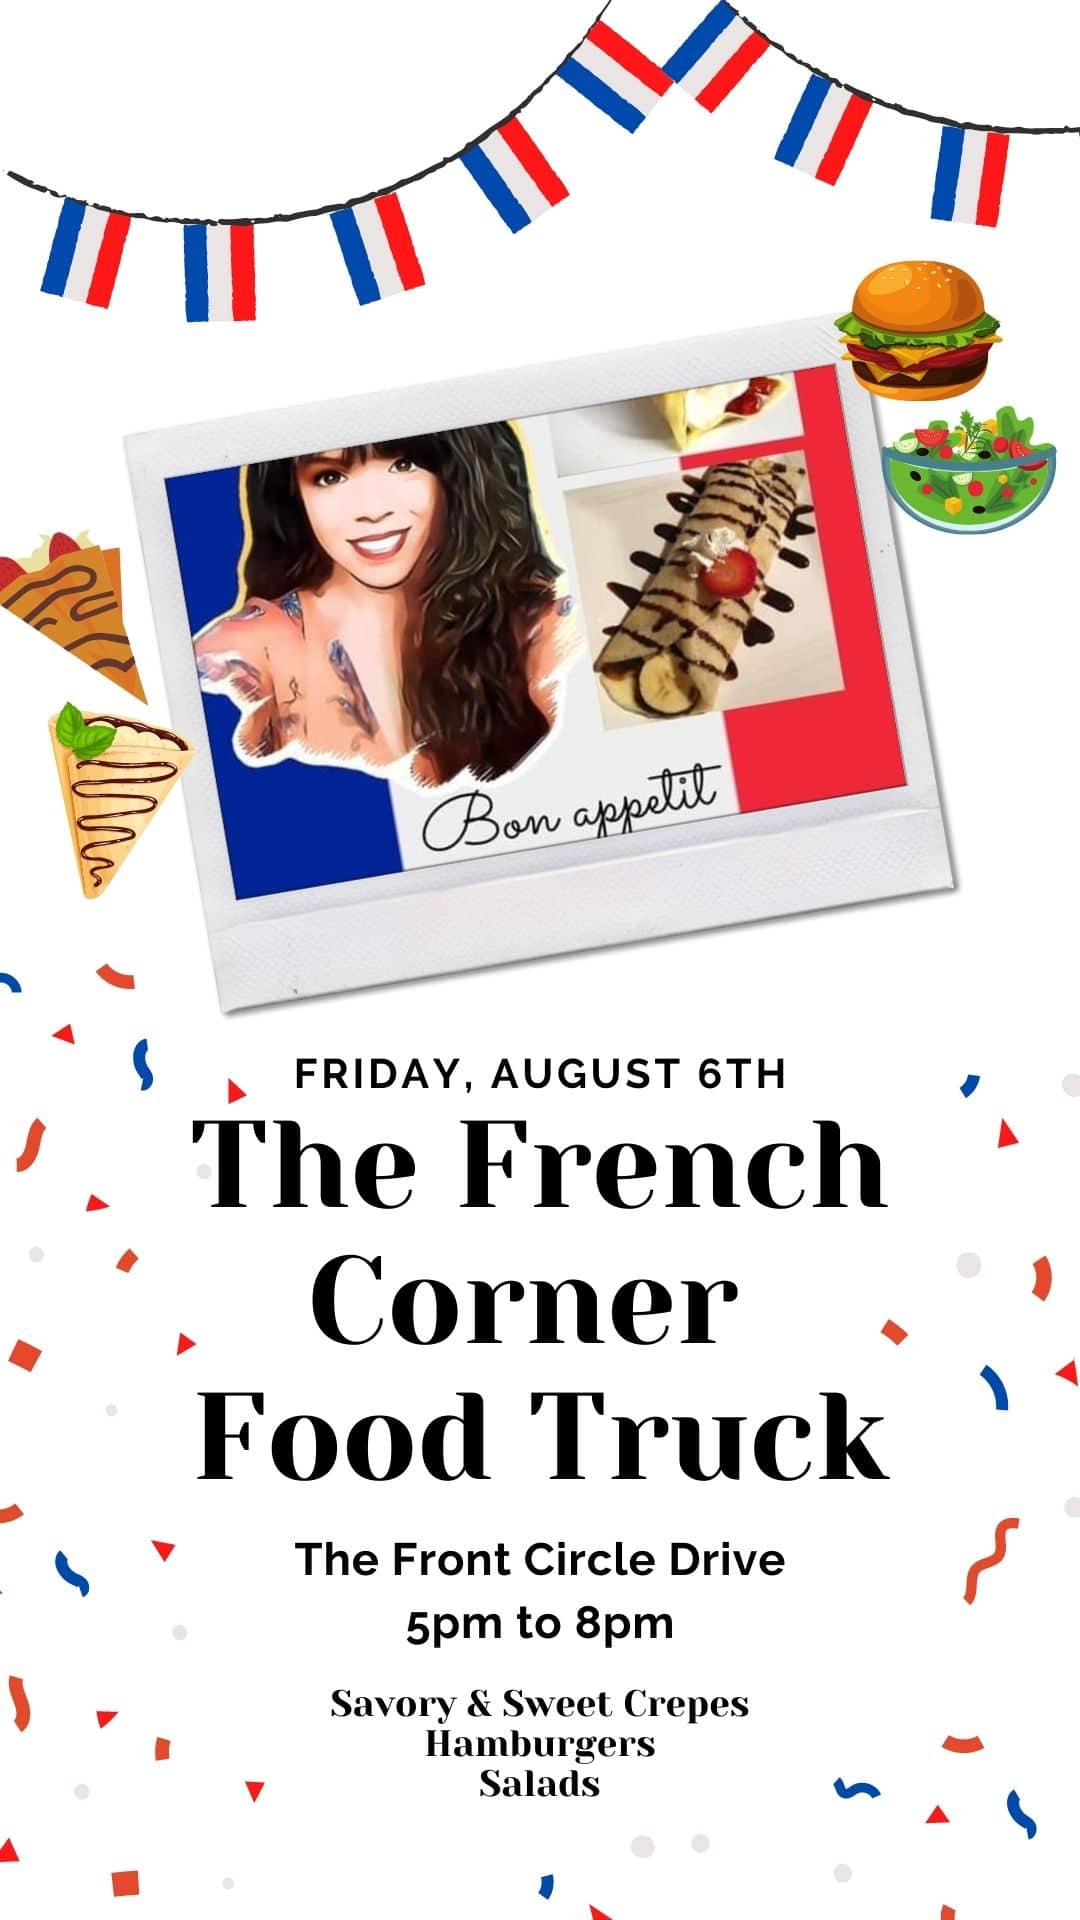 The French Corner food truck flyer is perfect for residents looking for apartments in The Woodlands TX.